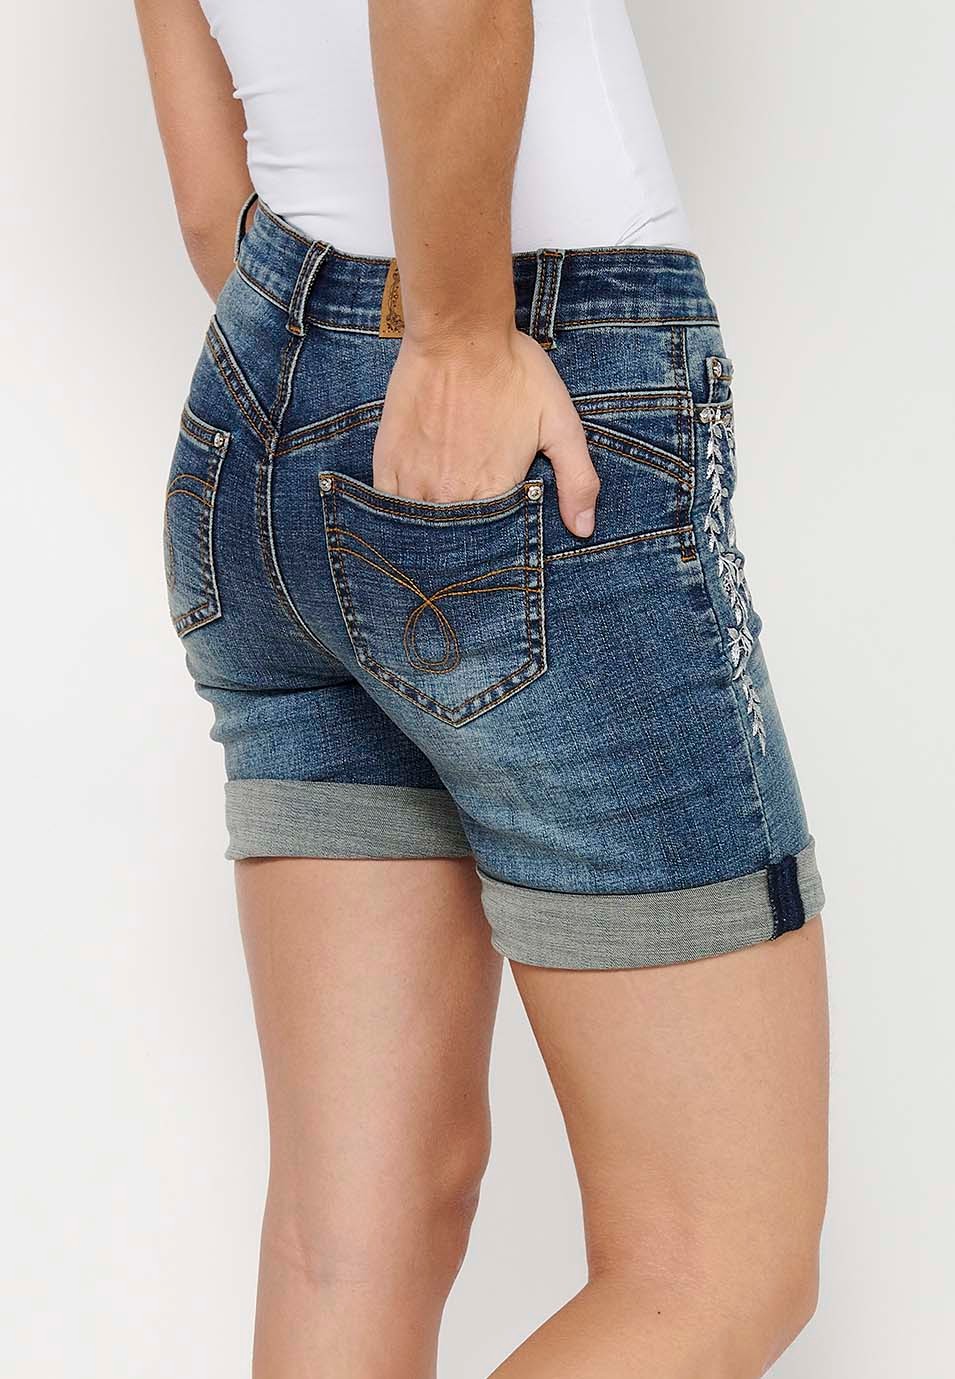 Short shorts with a turn-up finish with front zipper and button closure and blue floral embroidery for Women 8